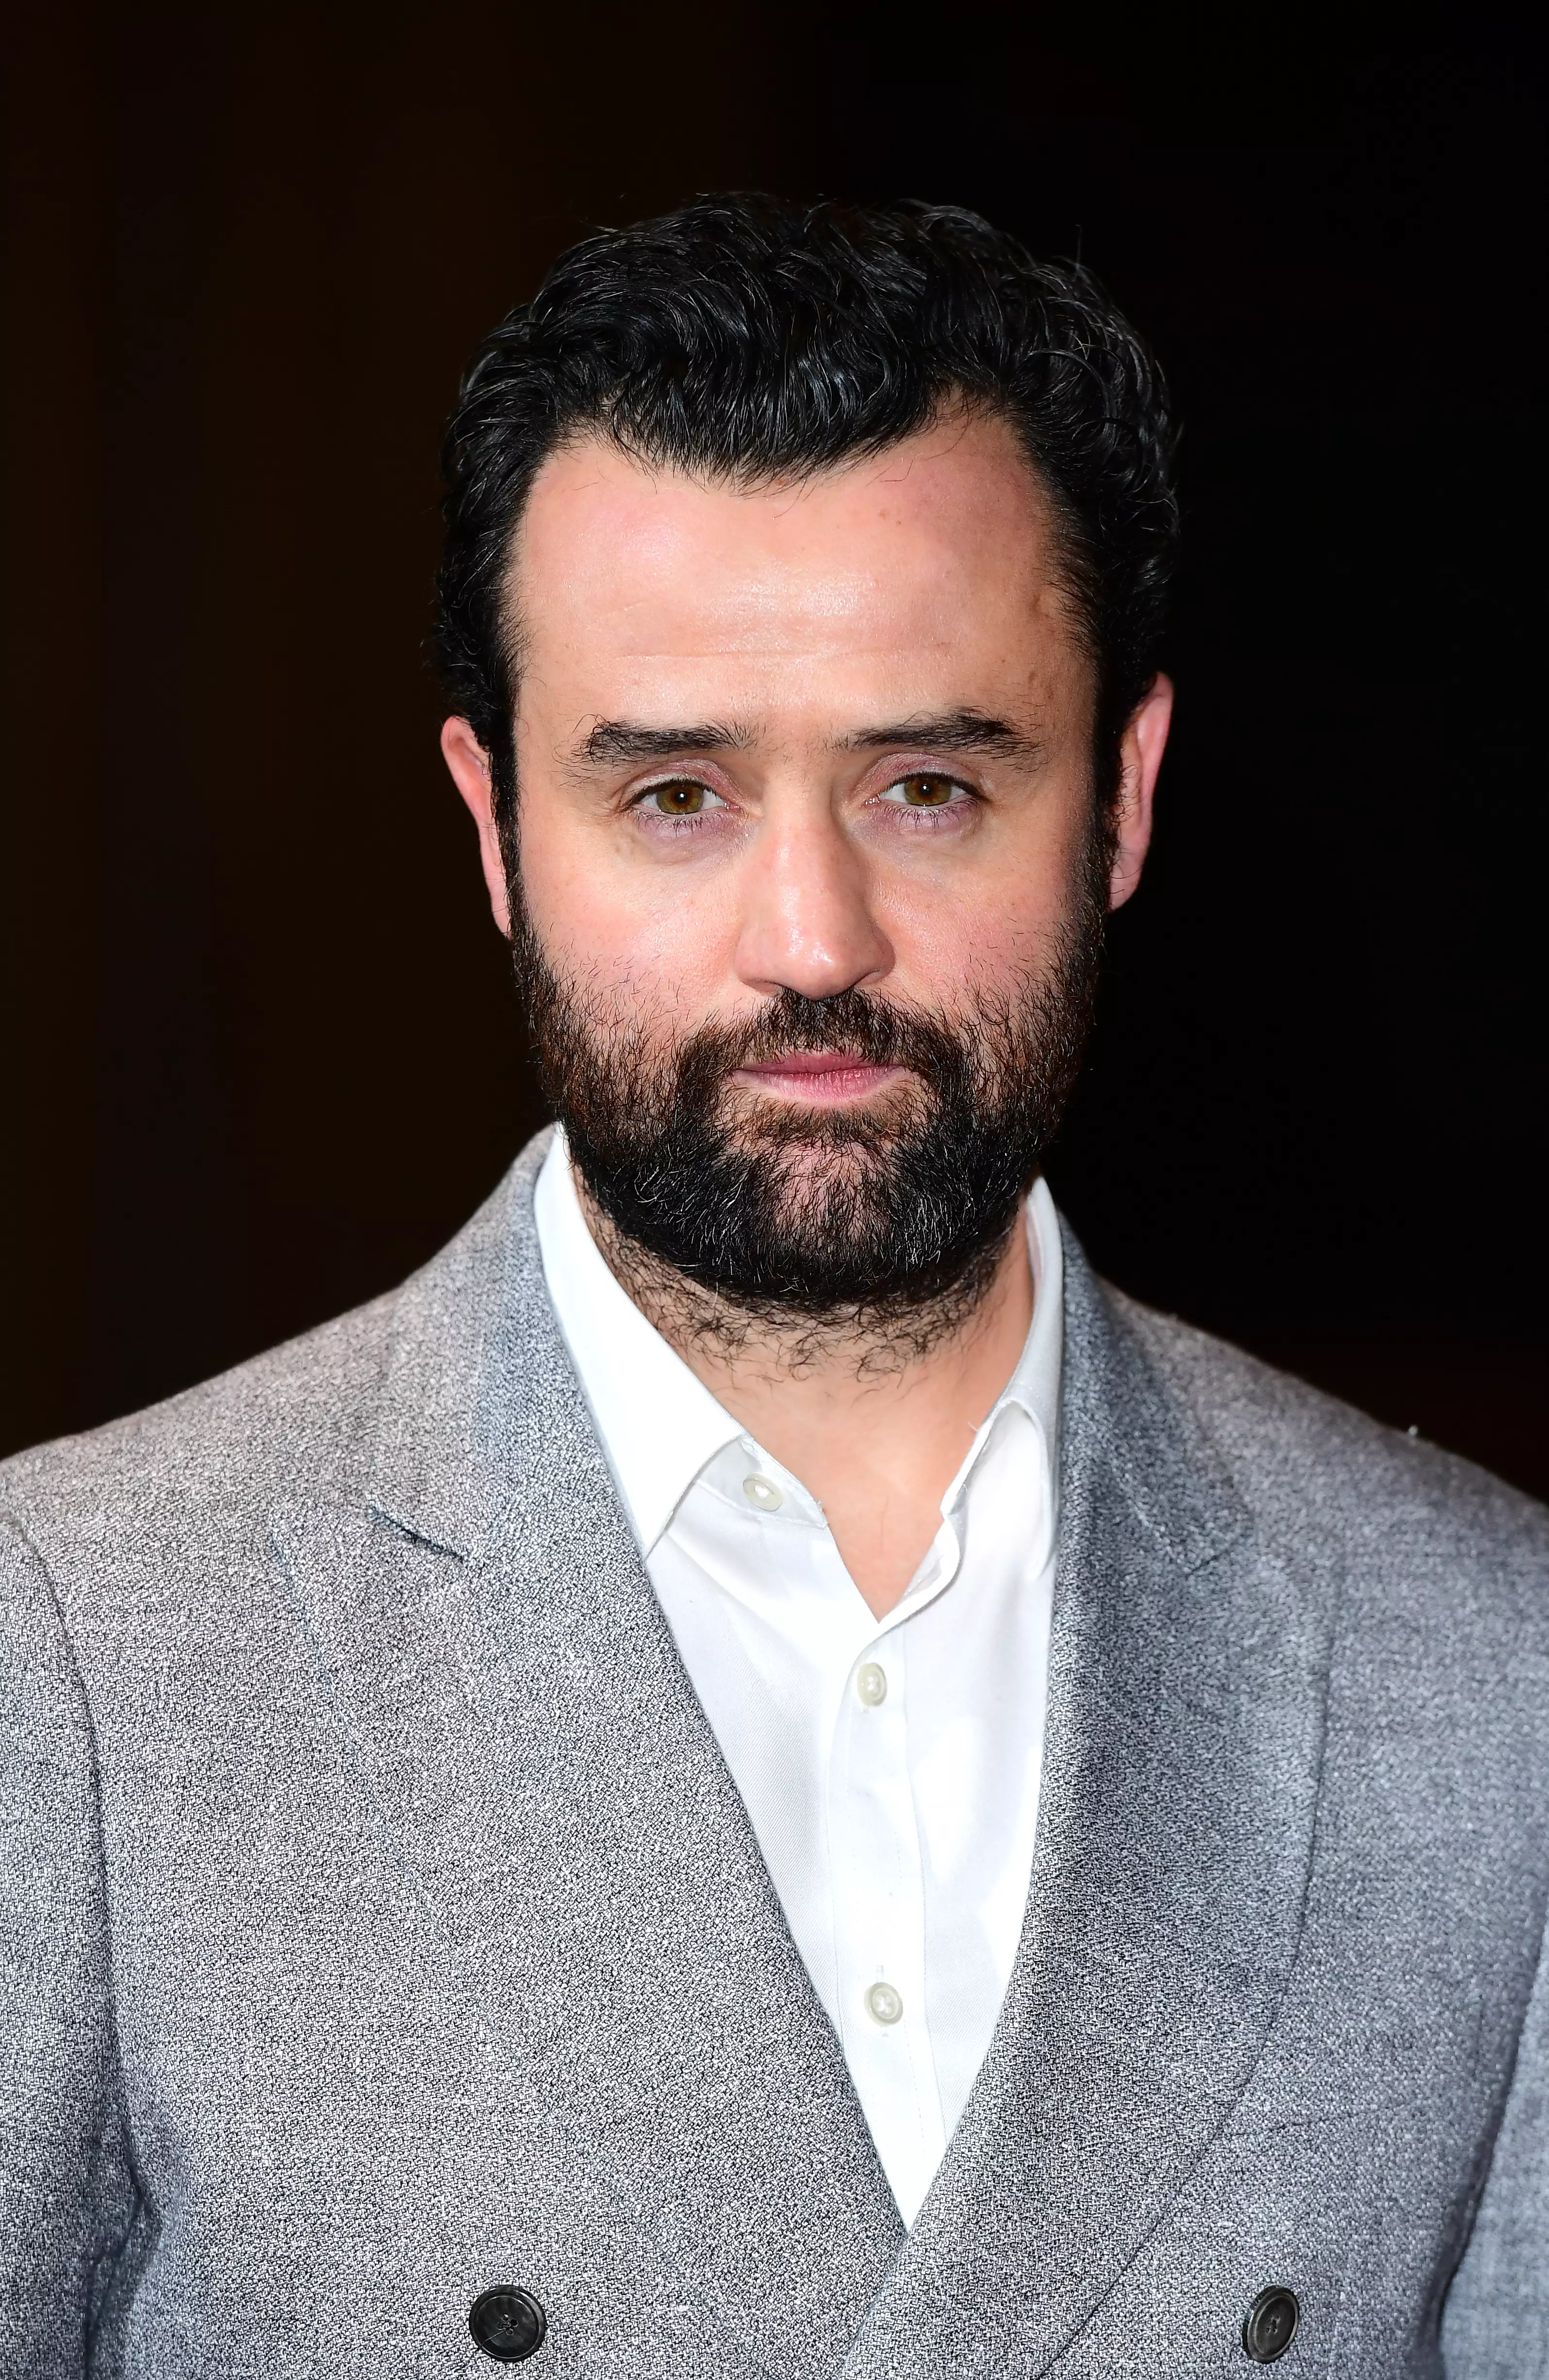 'Line of Duty's' Daniel Mays will also appear in the series.